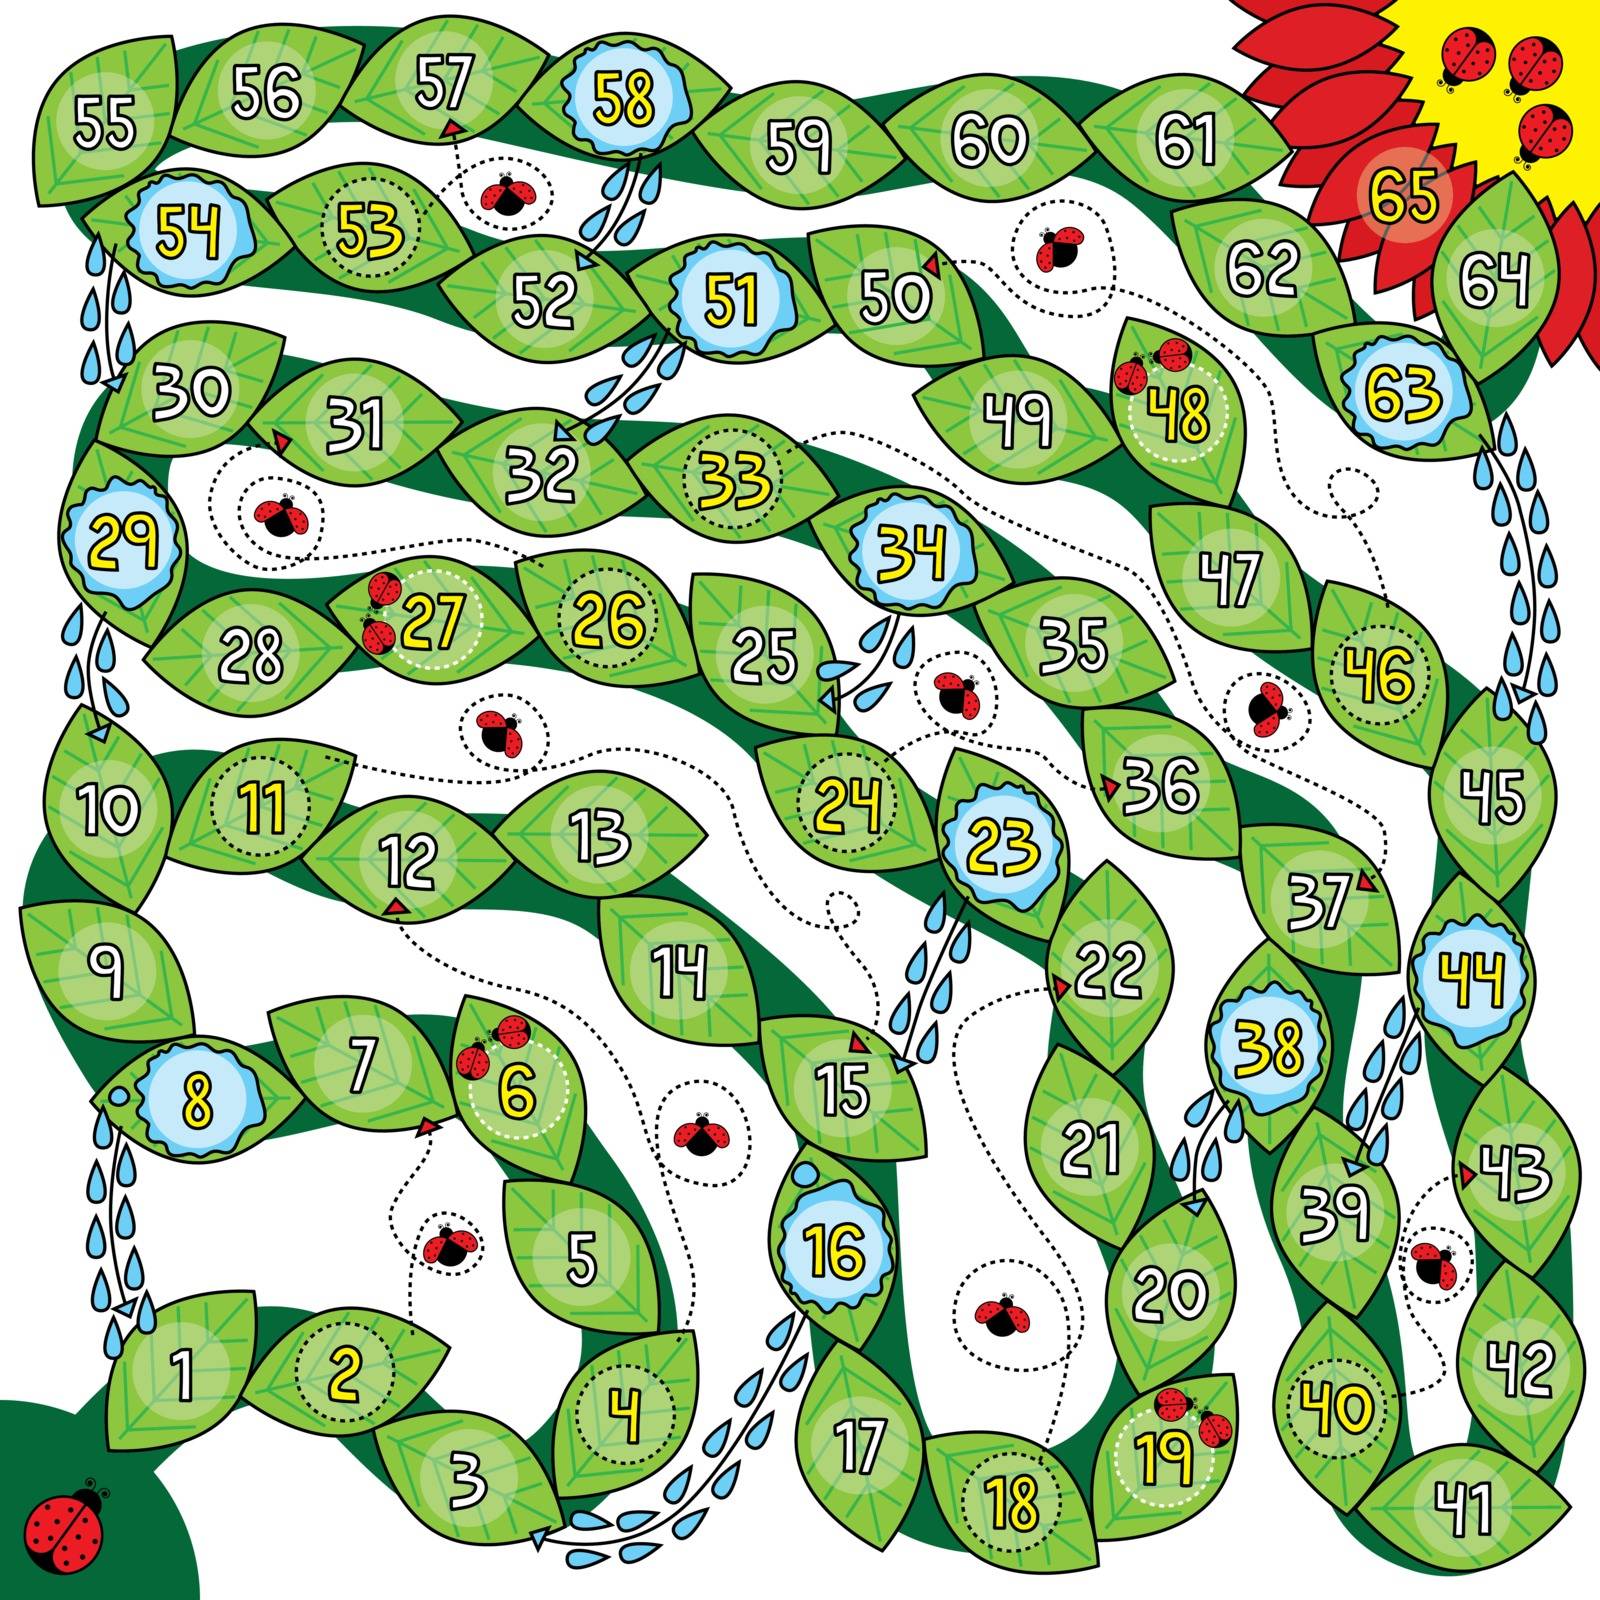 Illustrated ladybug board game with numbers